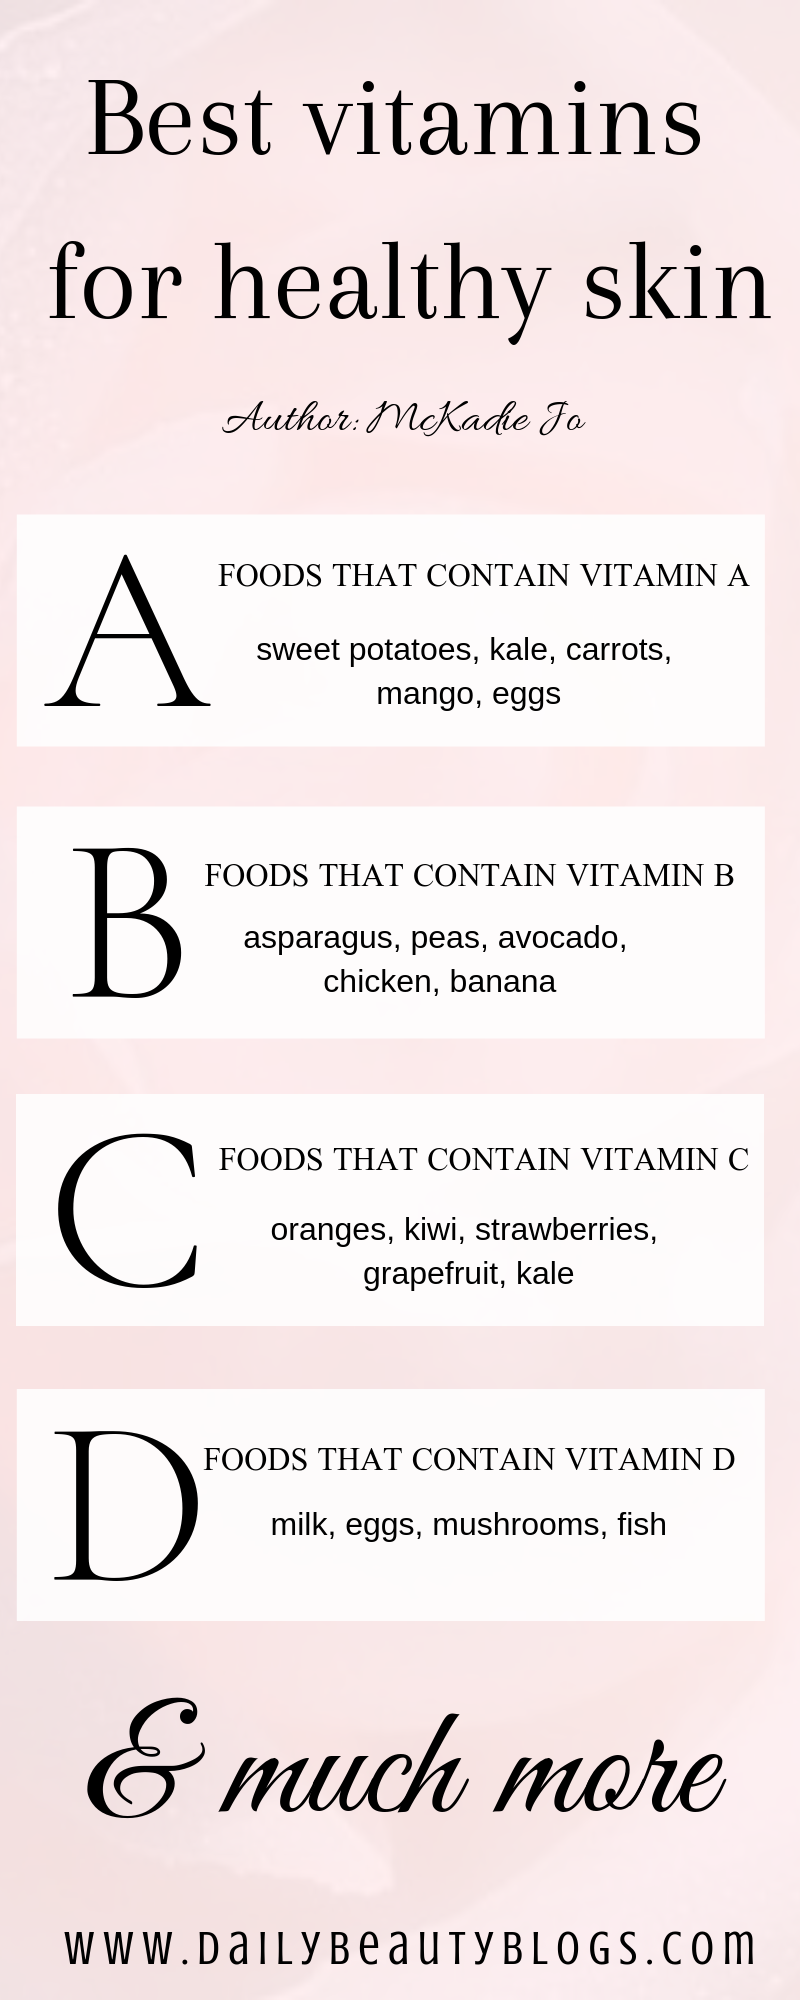 The Top 7 Best Vitamins For Healthy Skin - The Top 7 Best Vitamins For Healthy Skin -   16 healthy beauty Tips ideas